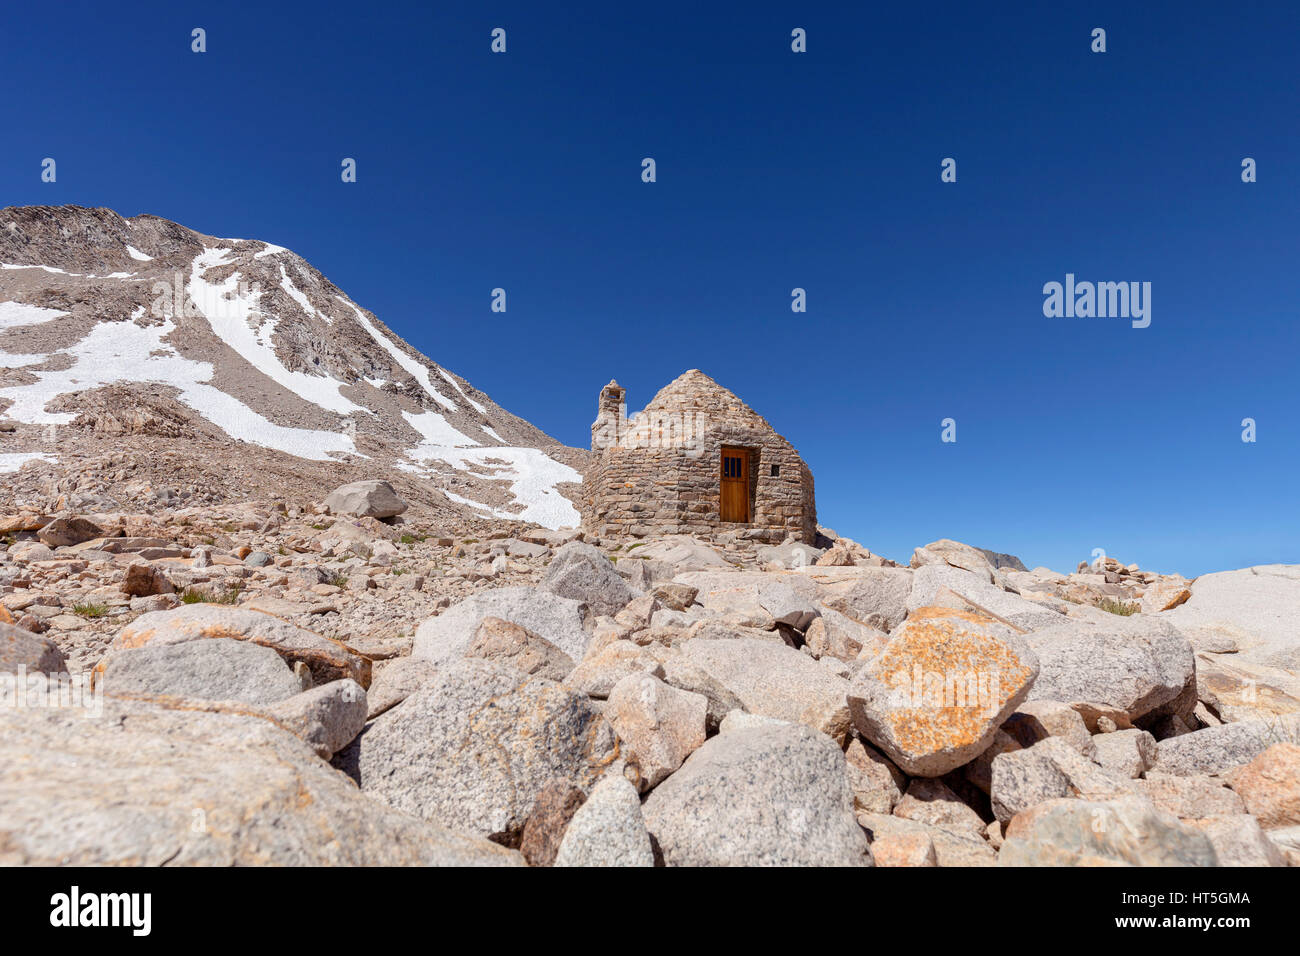 John Muir Hut on Muir Pass on the Pacific Crest Trail. Stock Photo